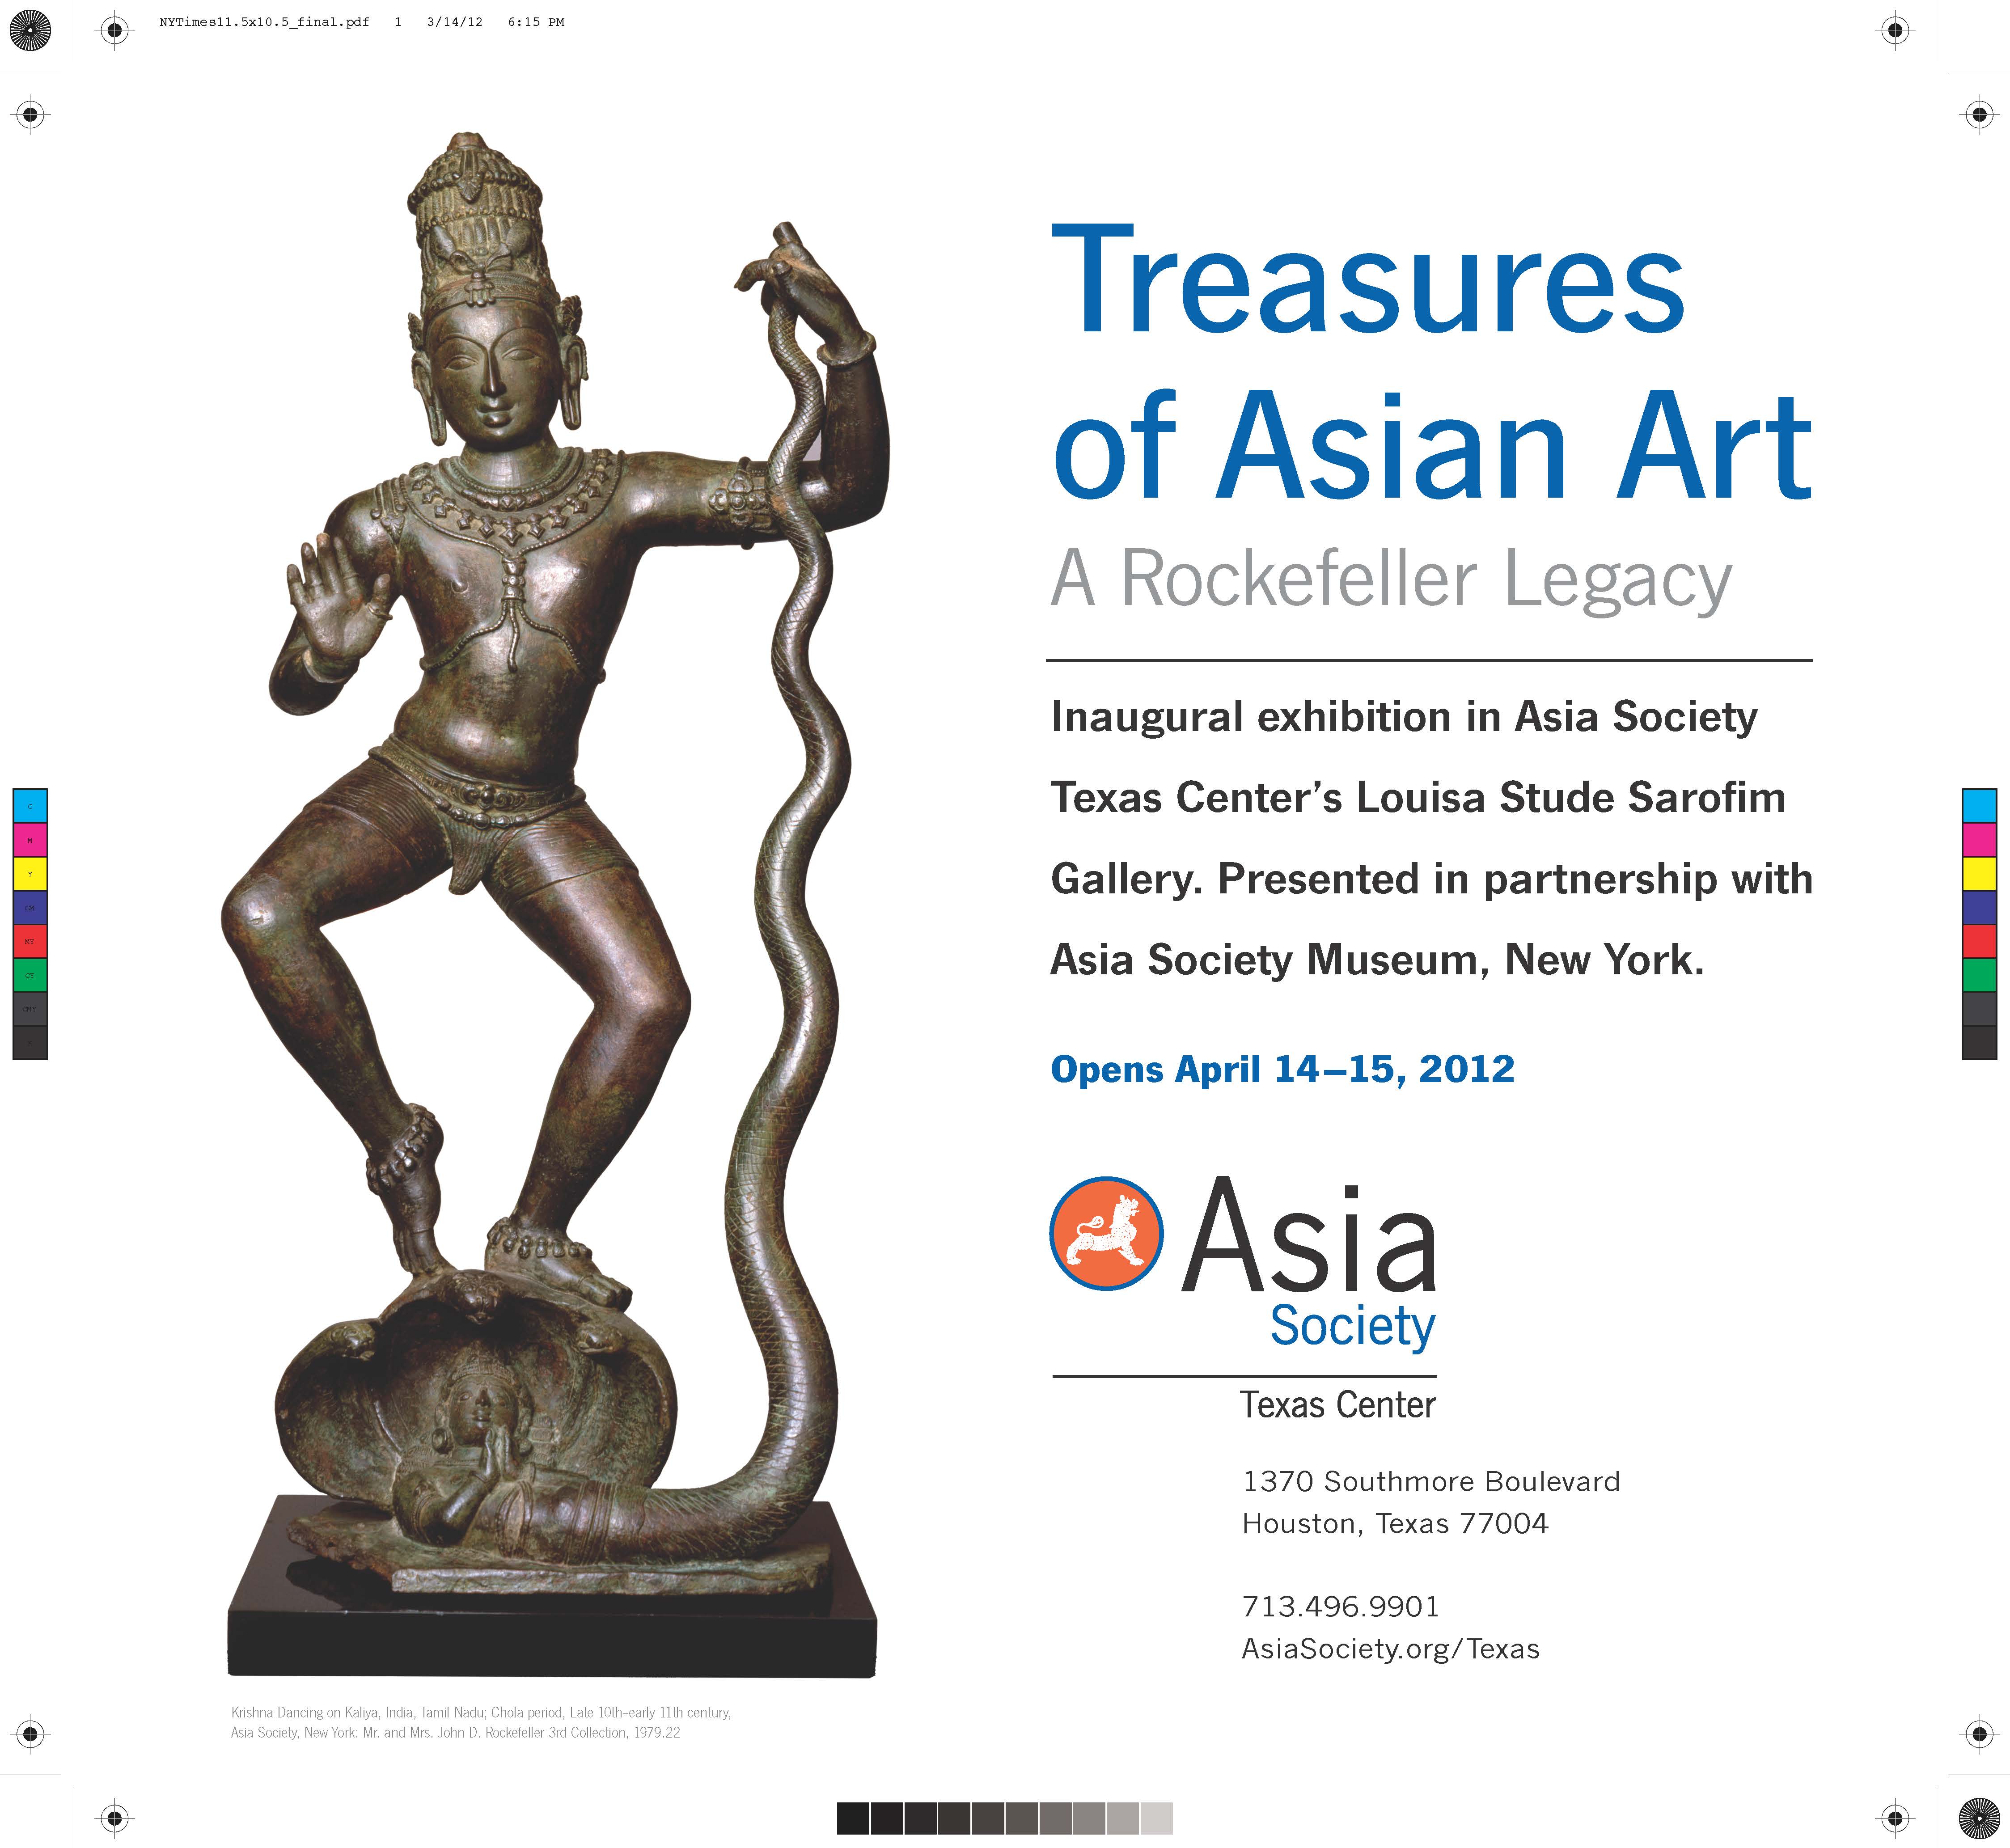 Two-sided insert design for the <i>New York Times</i> for Asia Society/Texas Center promoting an exhibition of 60 masterpieces from the Mr. & Mrs. John D. Rockefeller 3rd Collection.